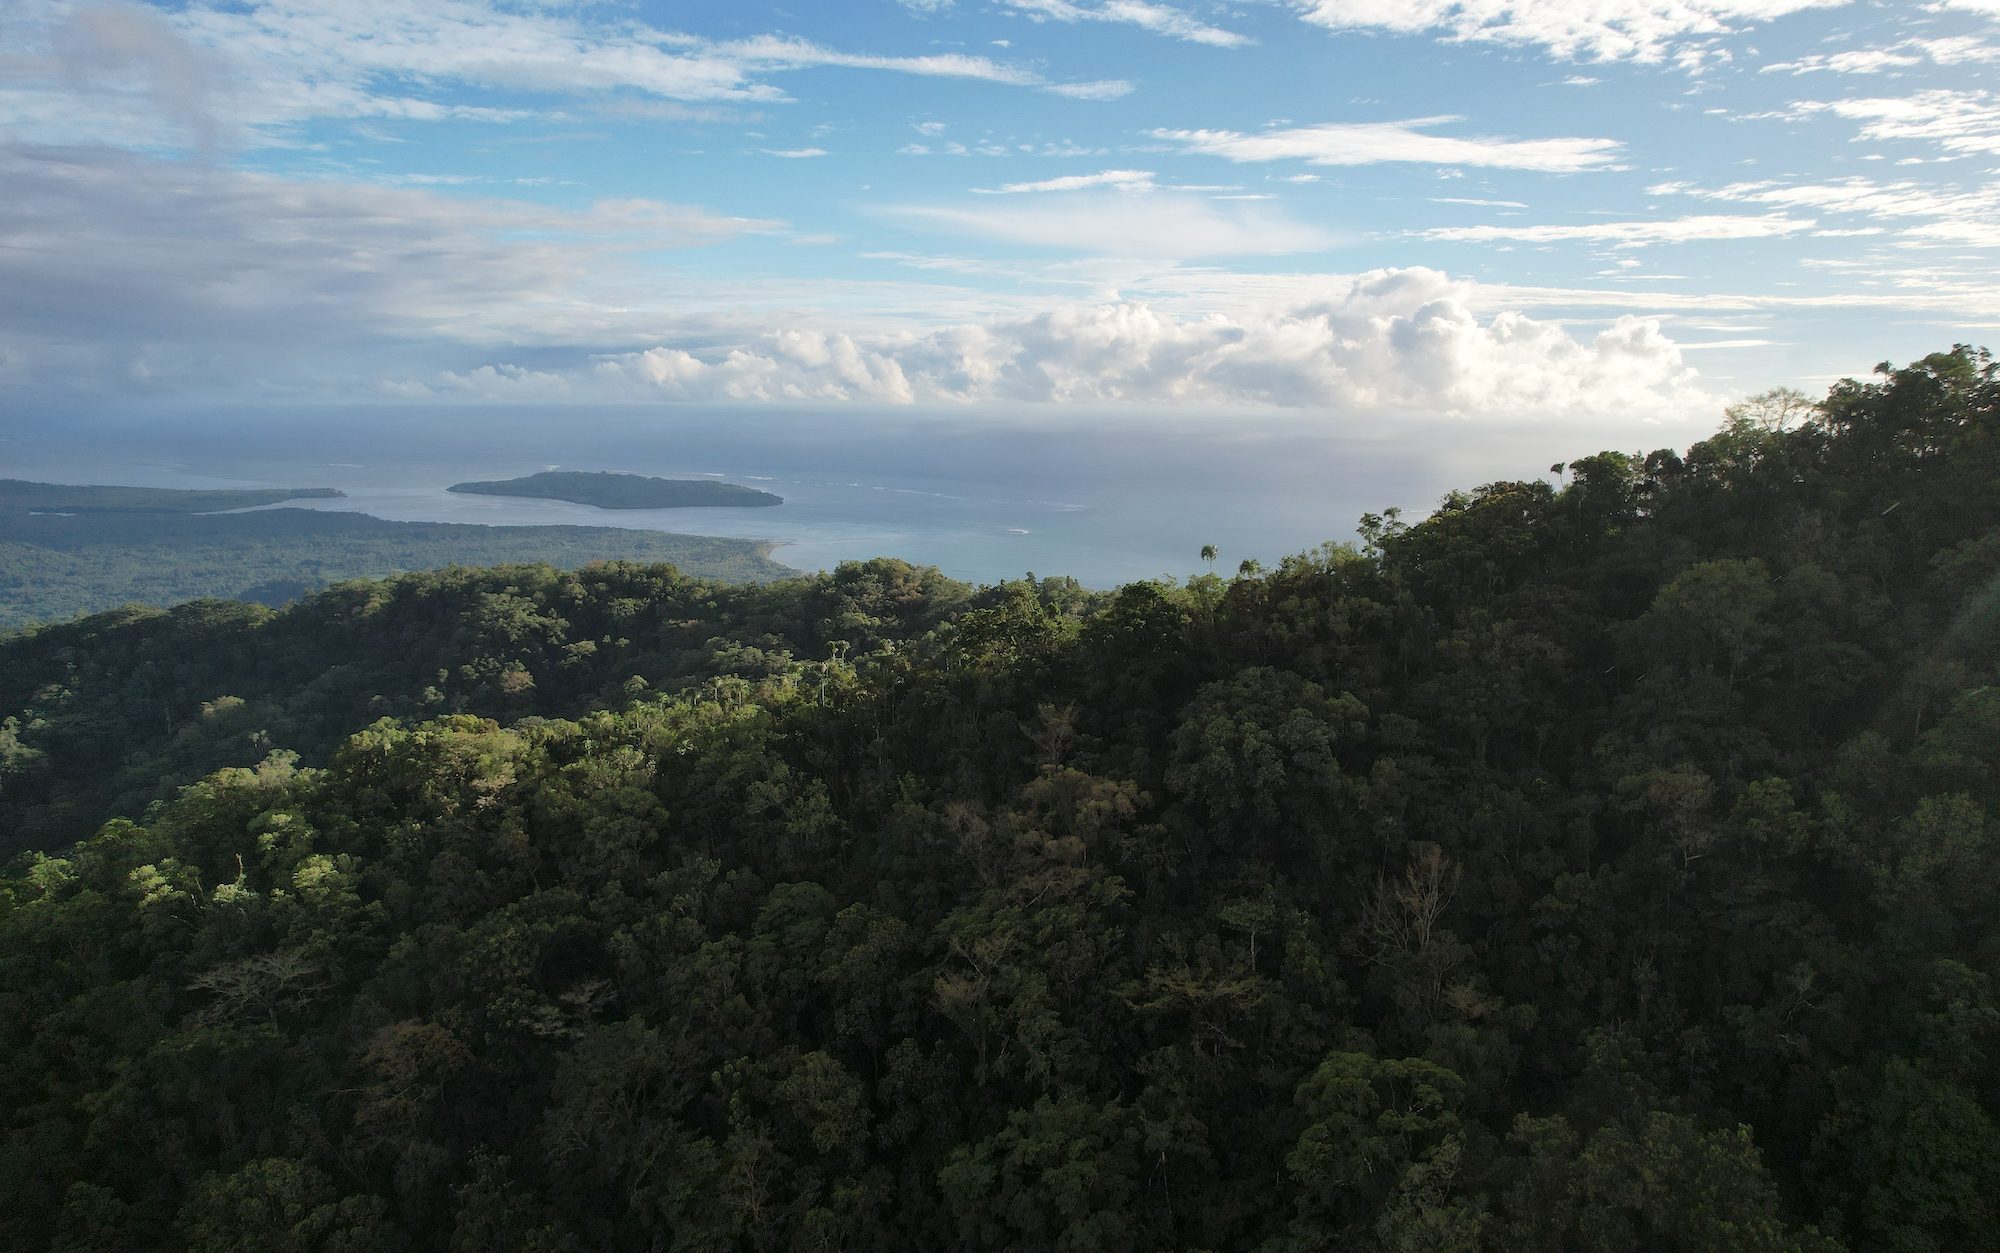 view from a high vantage point overlooking mountain and sea